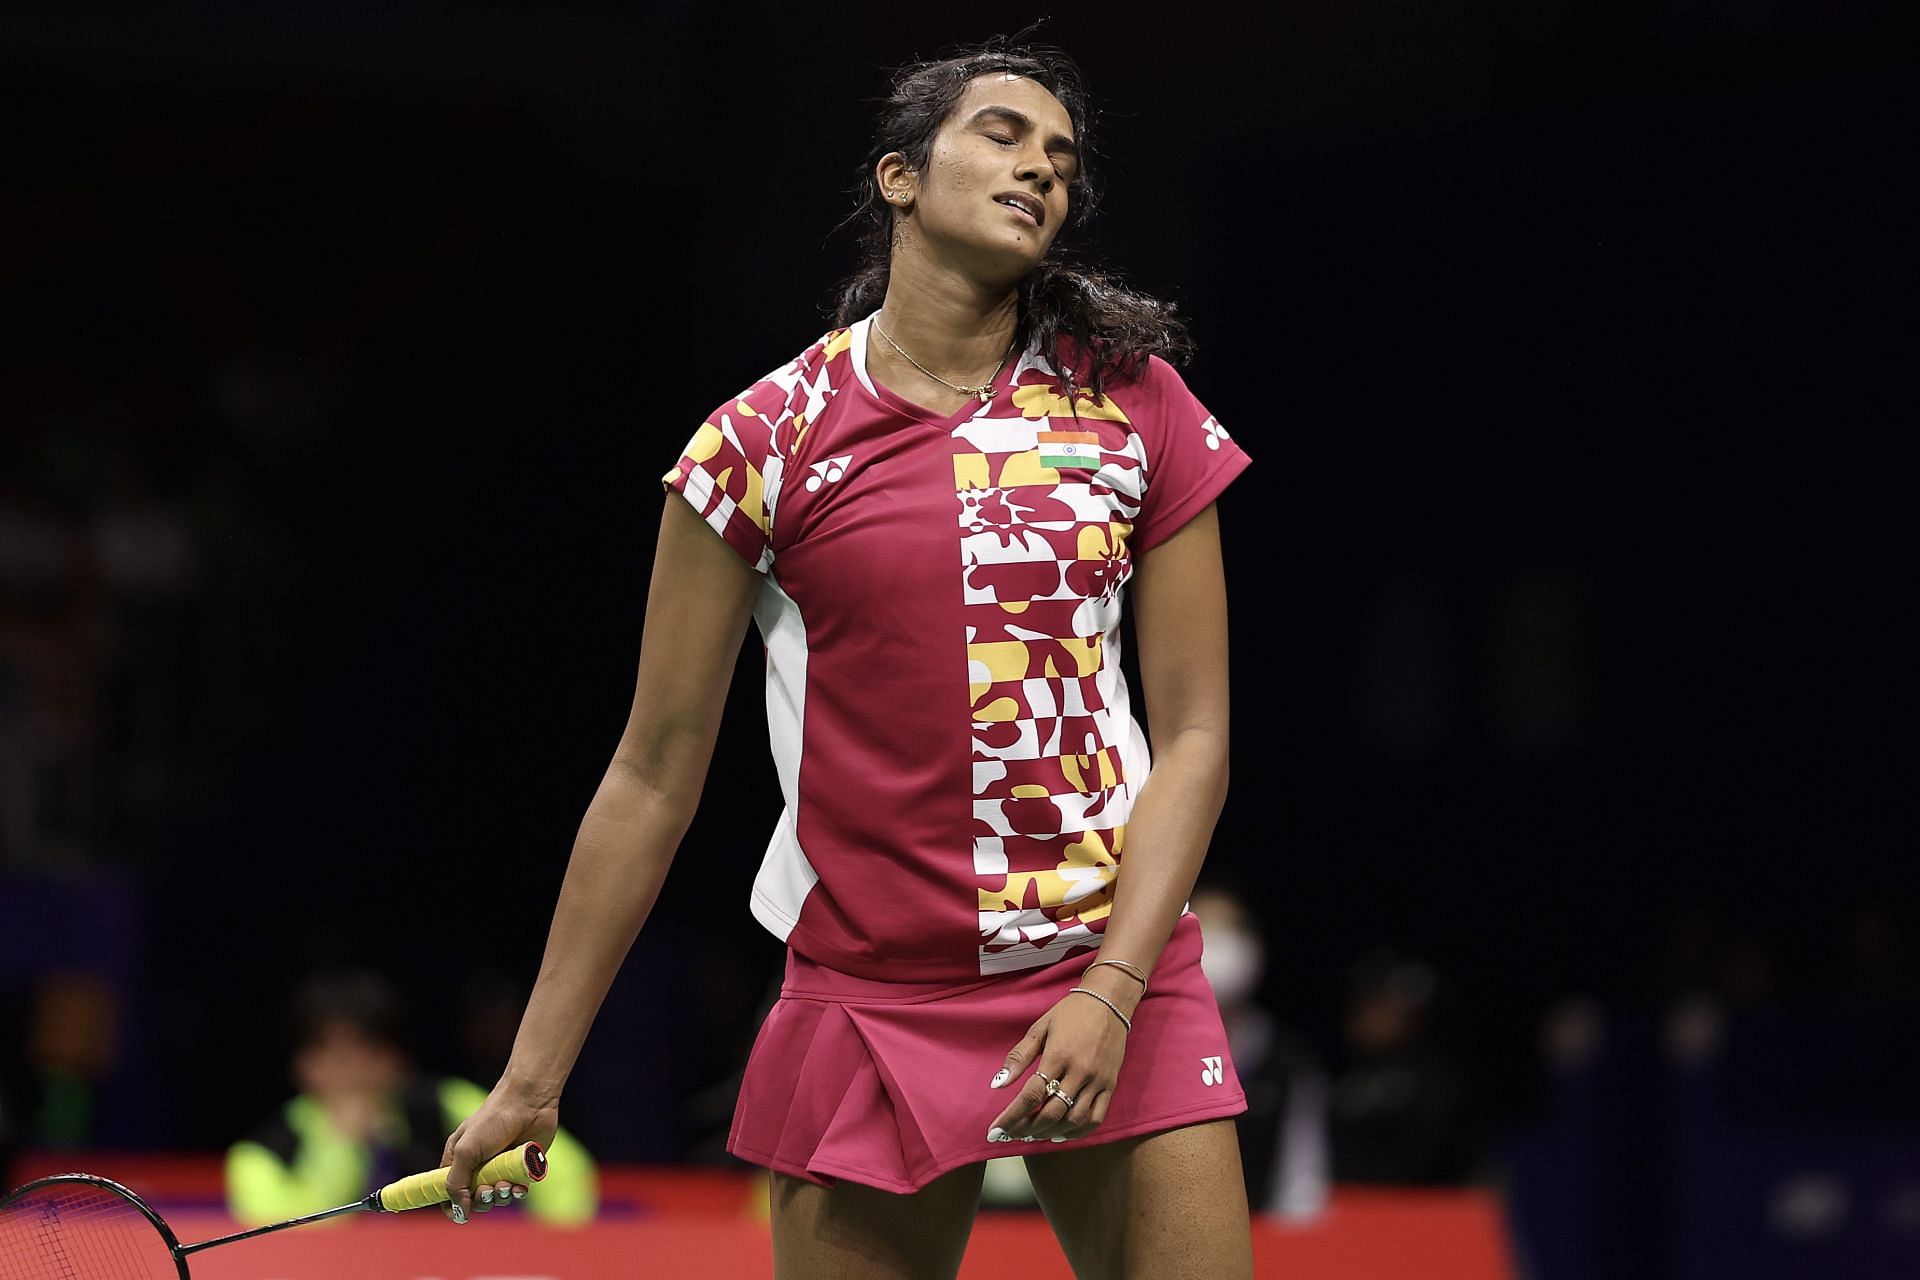 PV Sindhu has lost in the Round of 32 seven times this year in BWF World Tour events